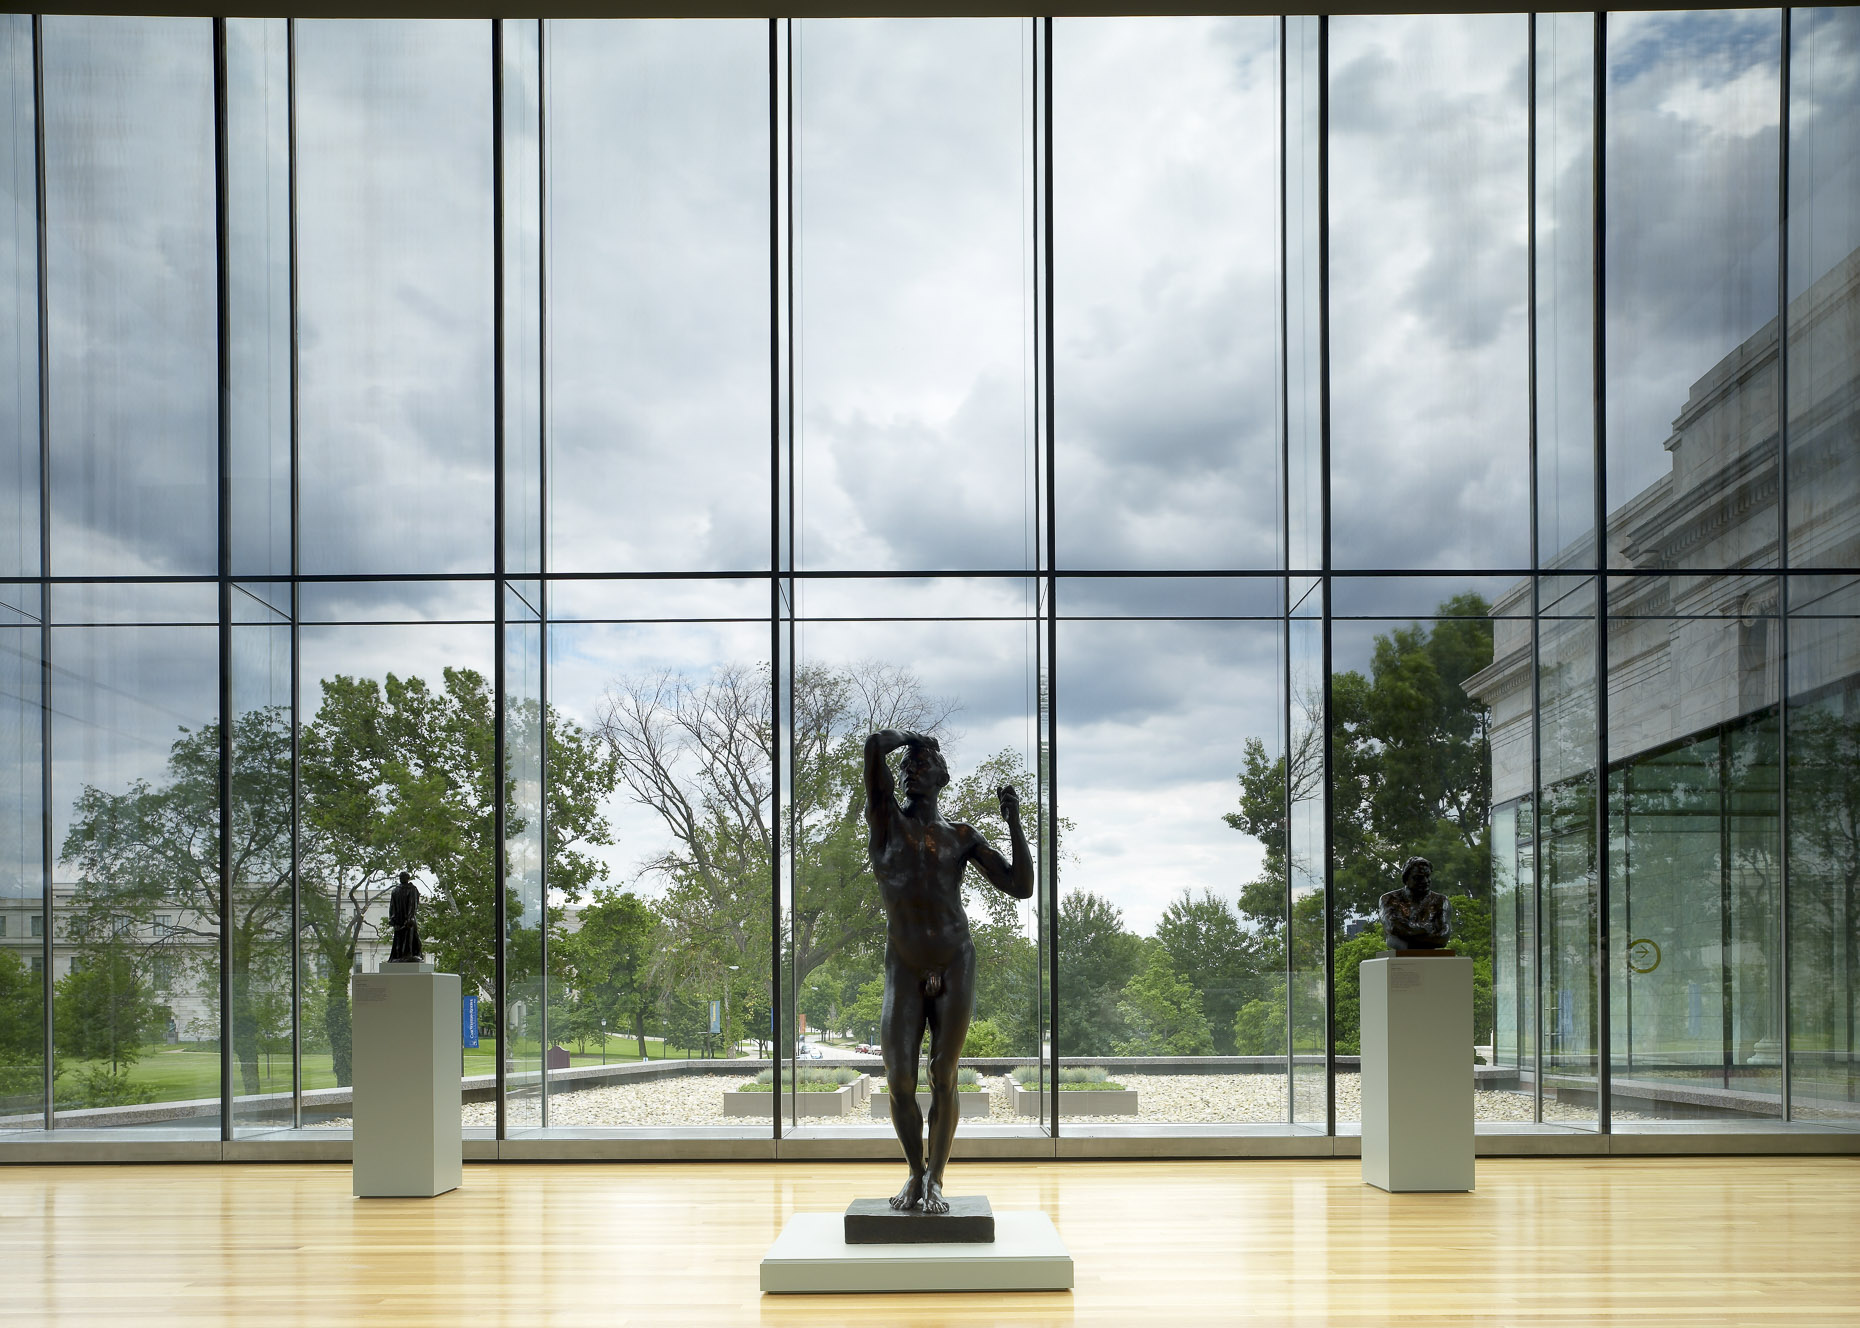 Cleveland Museum of Art Renovation by Rafael Vinoly Architects Photographed by Brad Feinknopf based in Columbus, Ohio